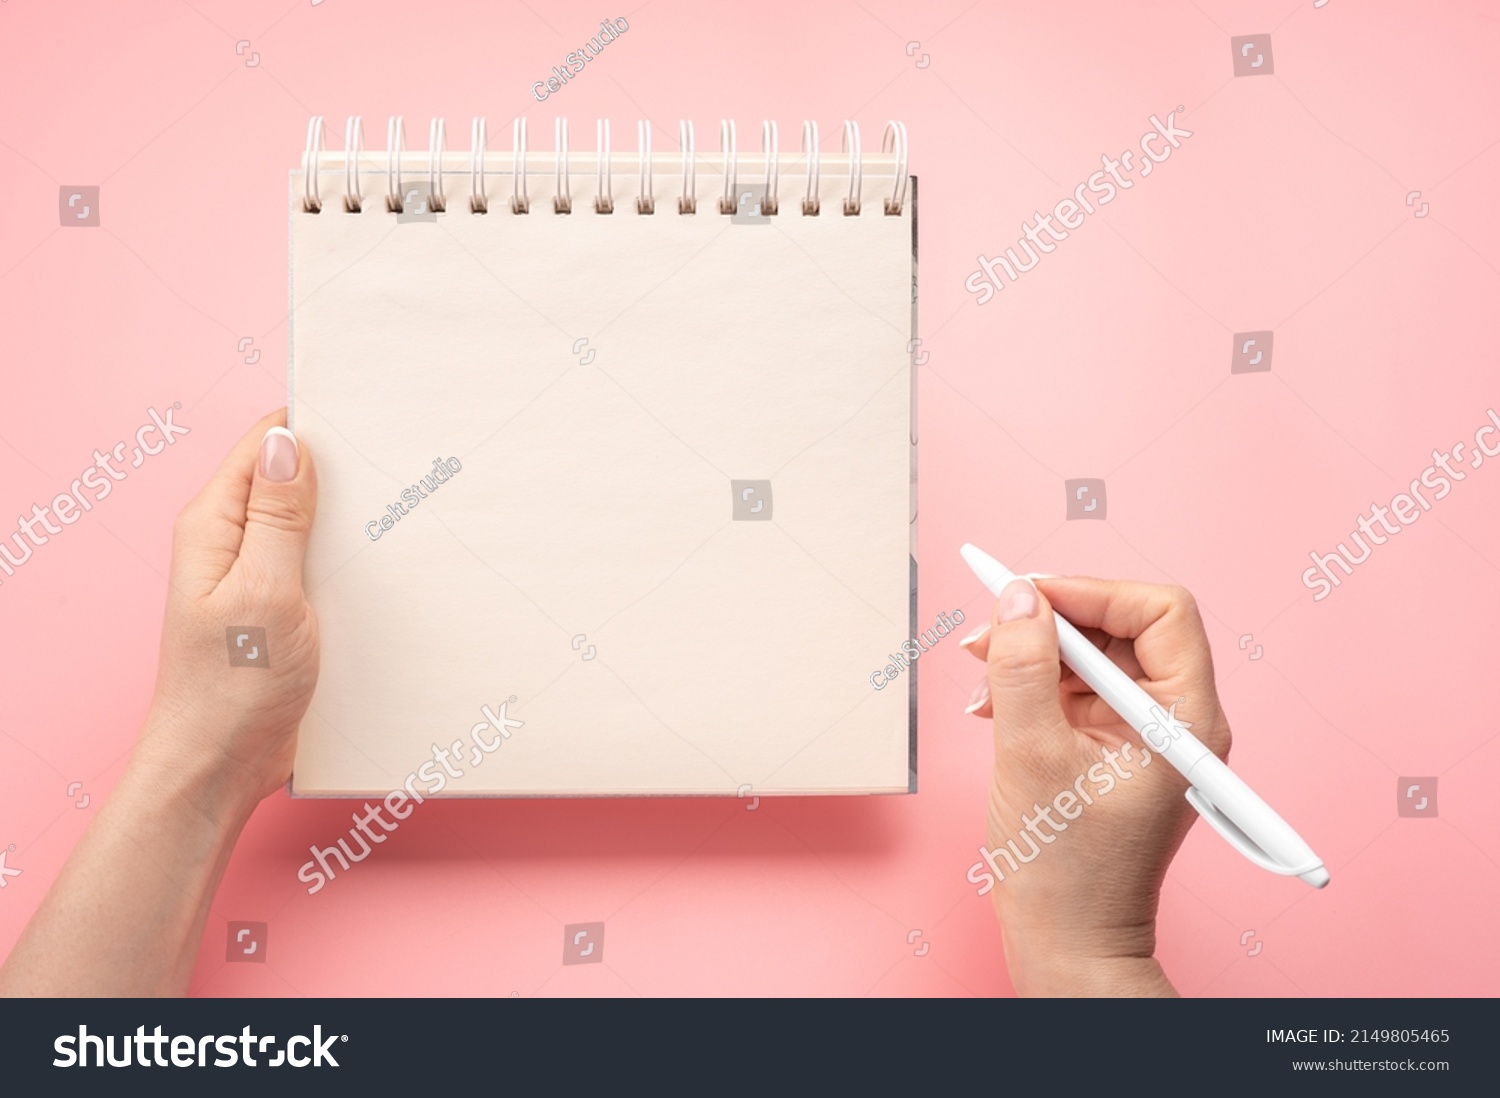 writing in blank notepad on pink background. Mockup notepad. woman hand with pen next to an empty blank notepad. top view of hand holding pen against spiral notepad on pink table, taking notes concept #2149805465